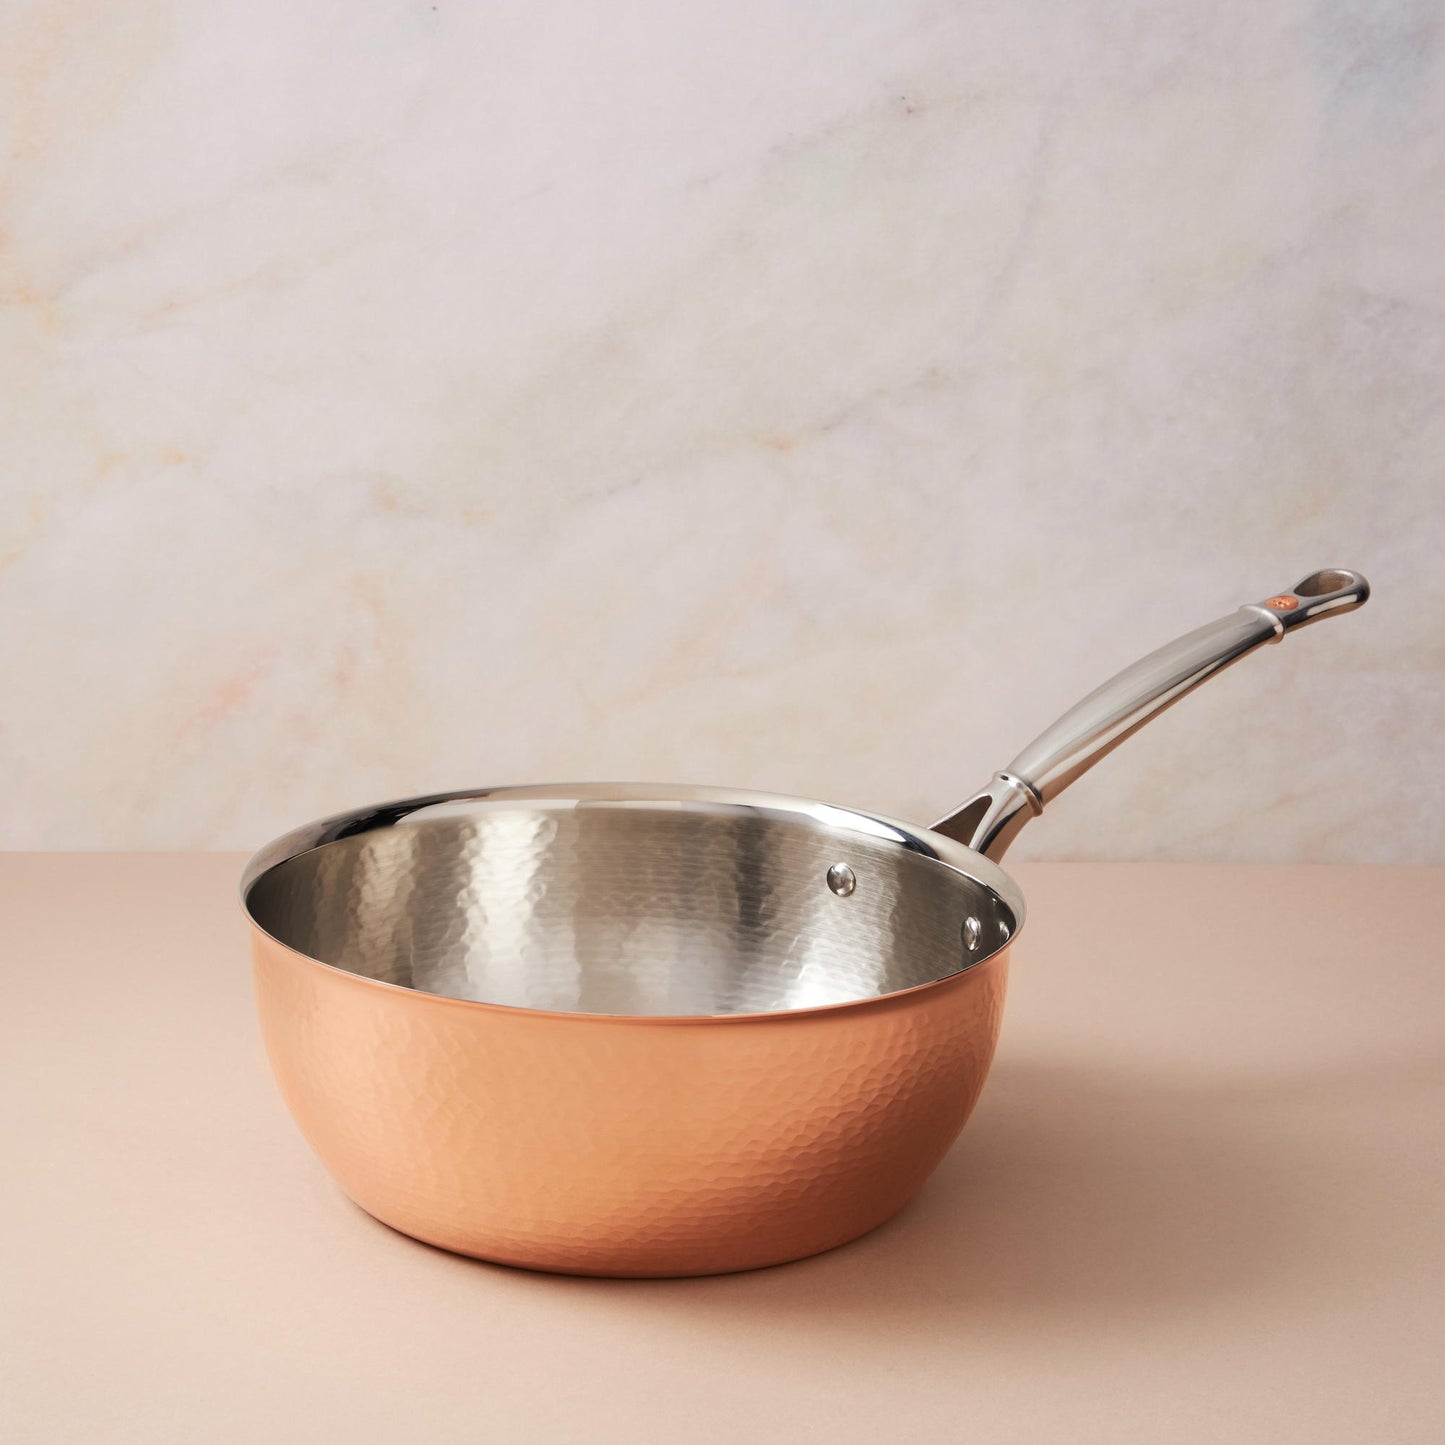 Chef's pan in hammered copper with stainless steel lining from Ruffoni